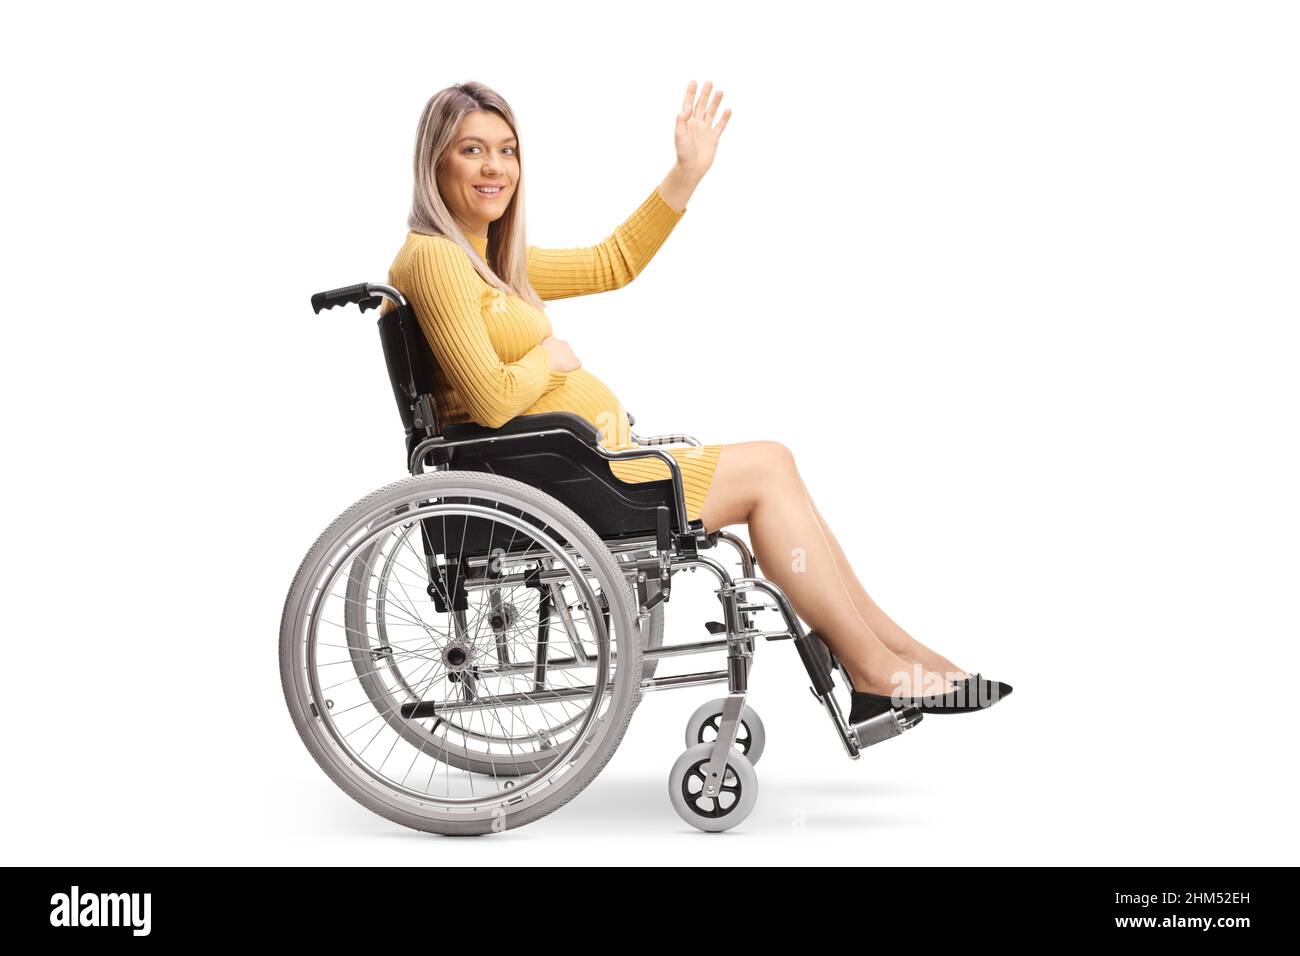 Full length profile shot of a pregnant woman sitting in a wheelchair and waving isolated on white background Stock Photo